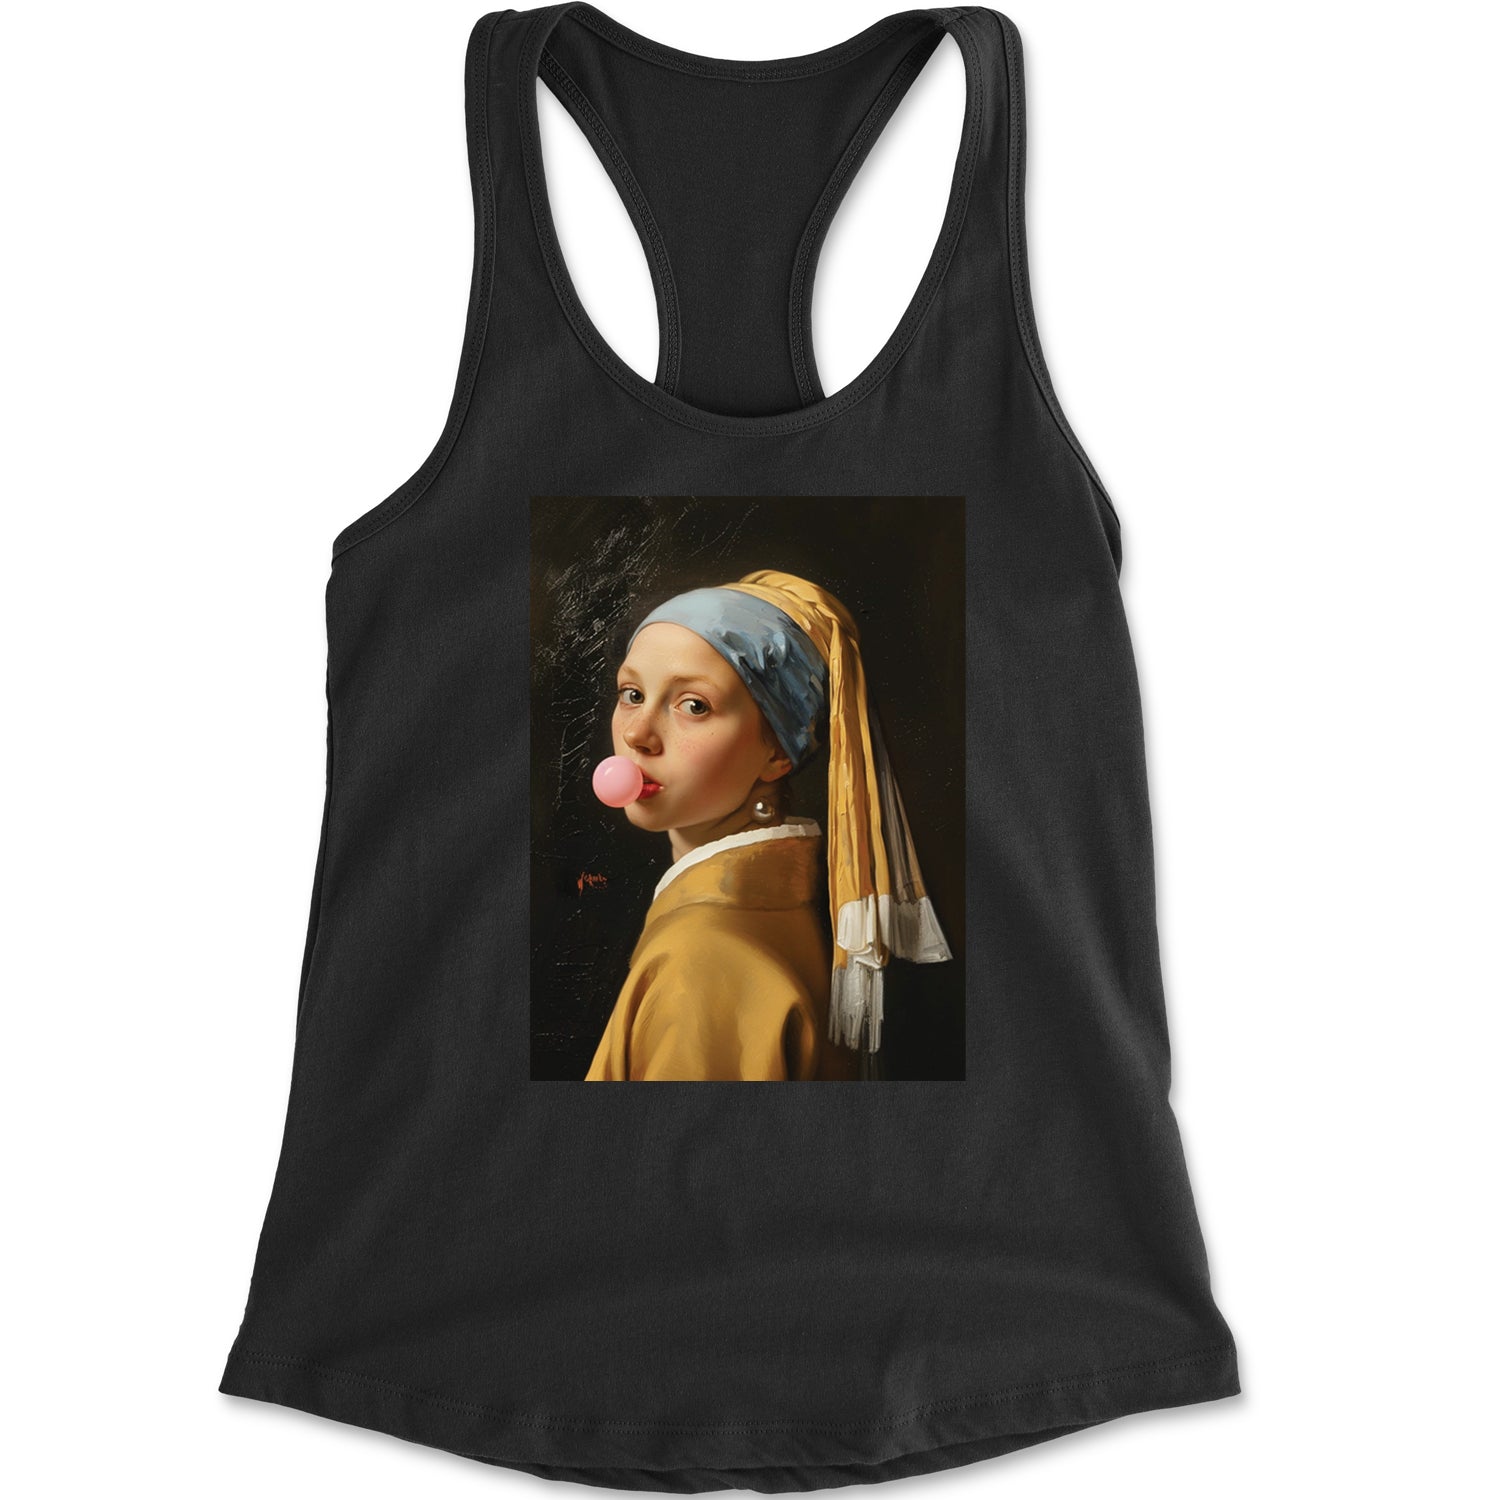 Girl with a Pearl Earring Bubble Gum Contemporary Art Racerback Tank Top for Women